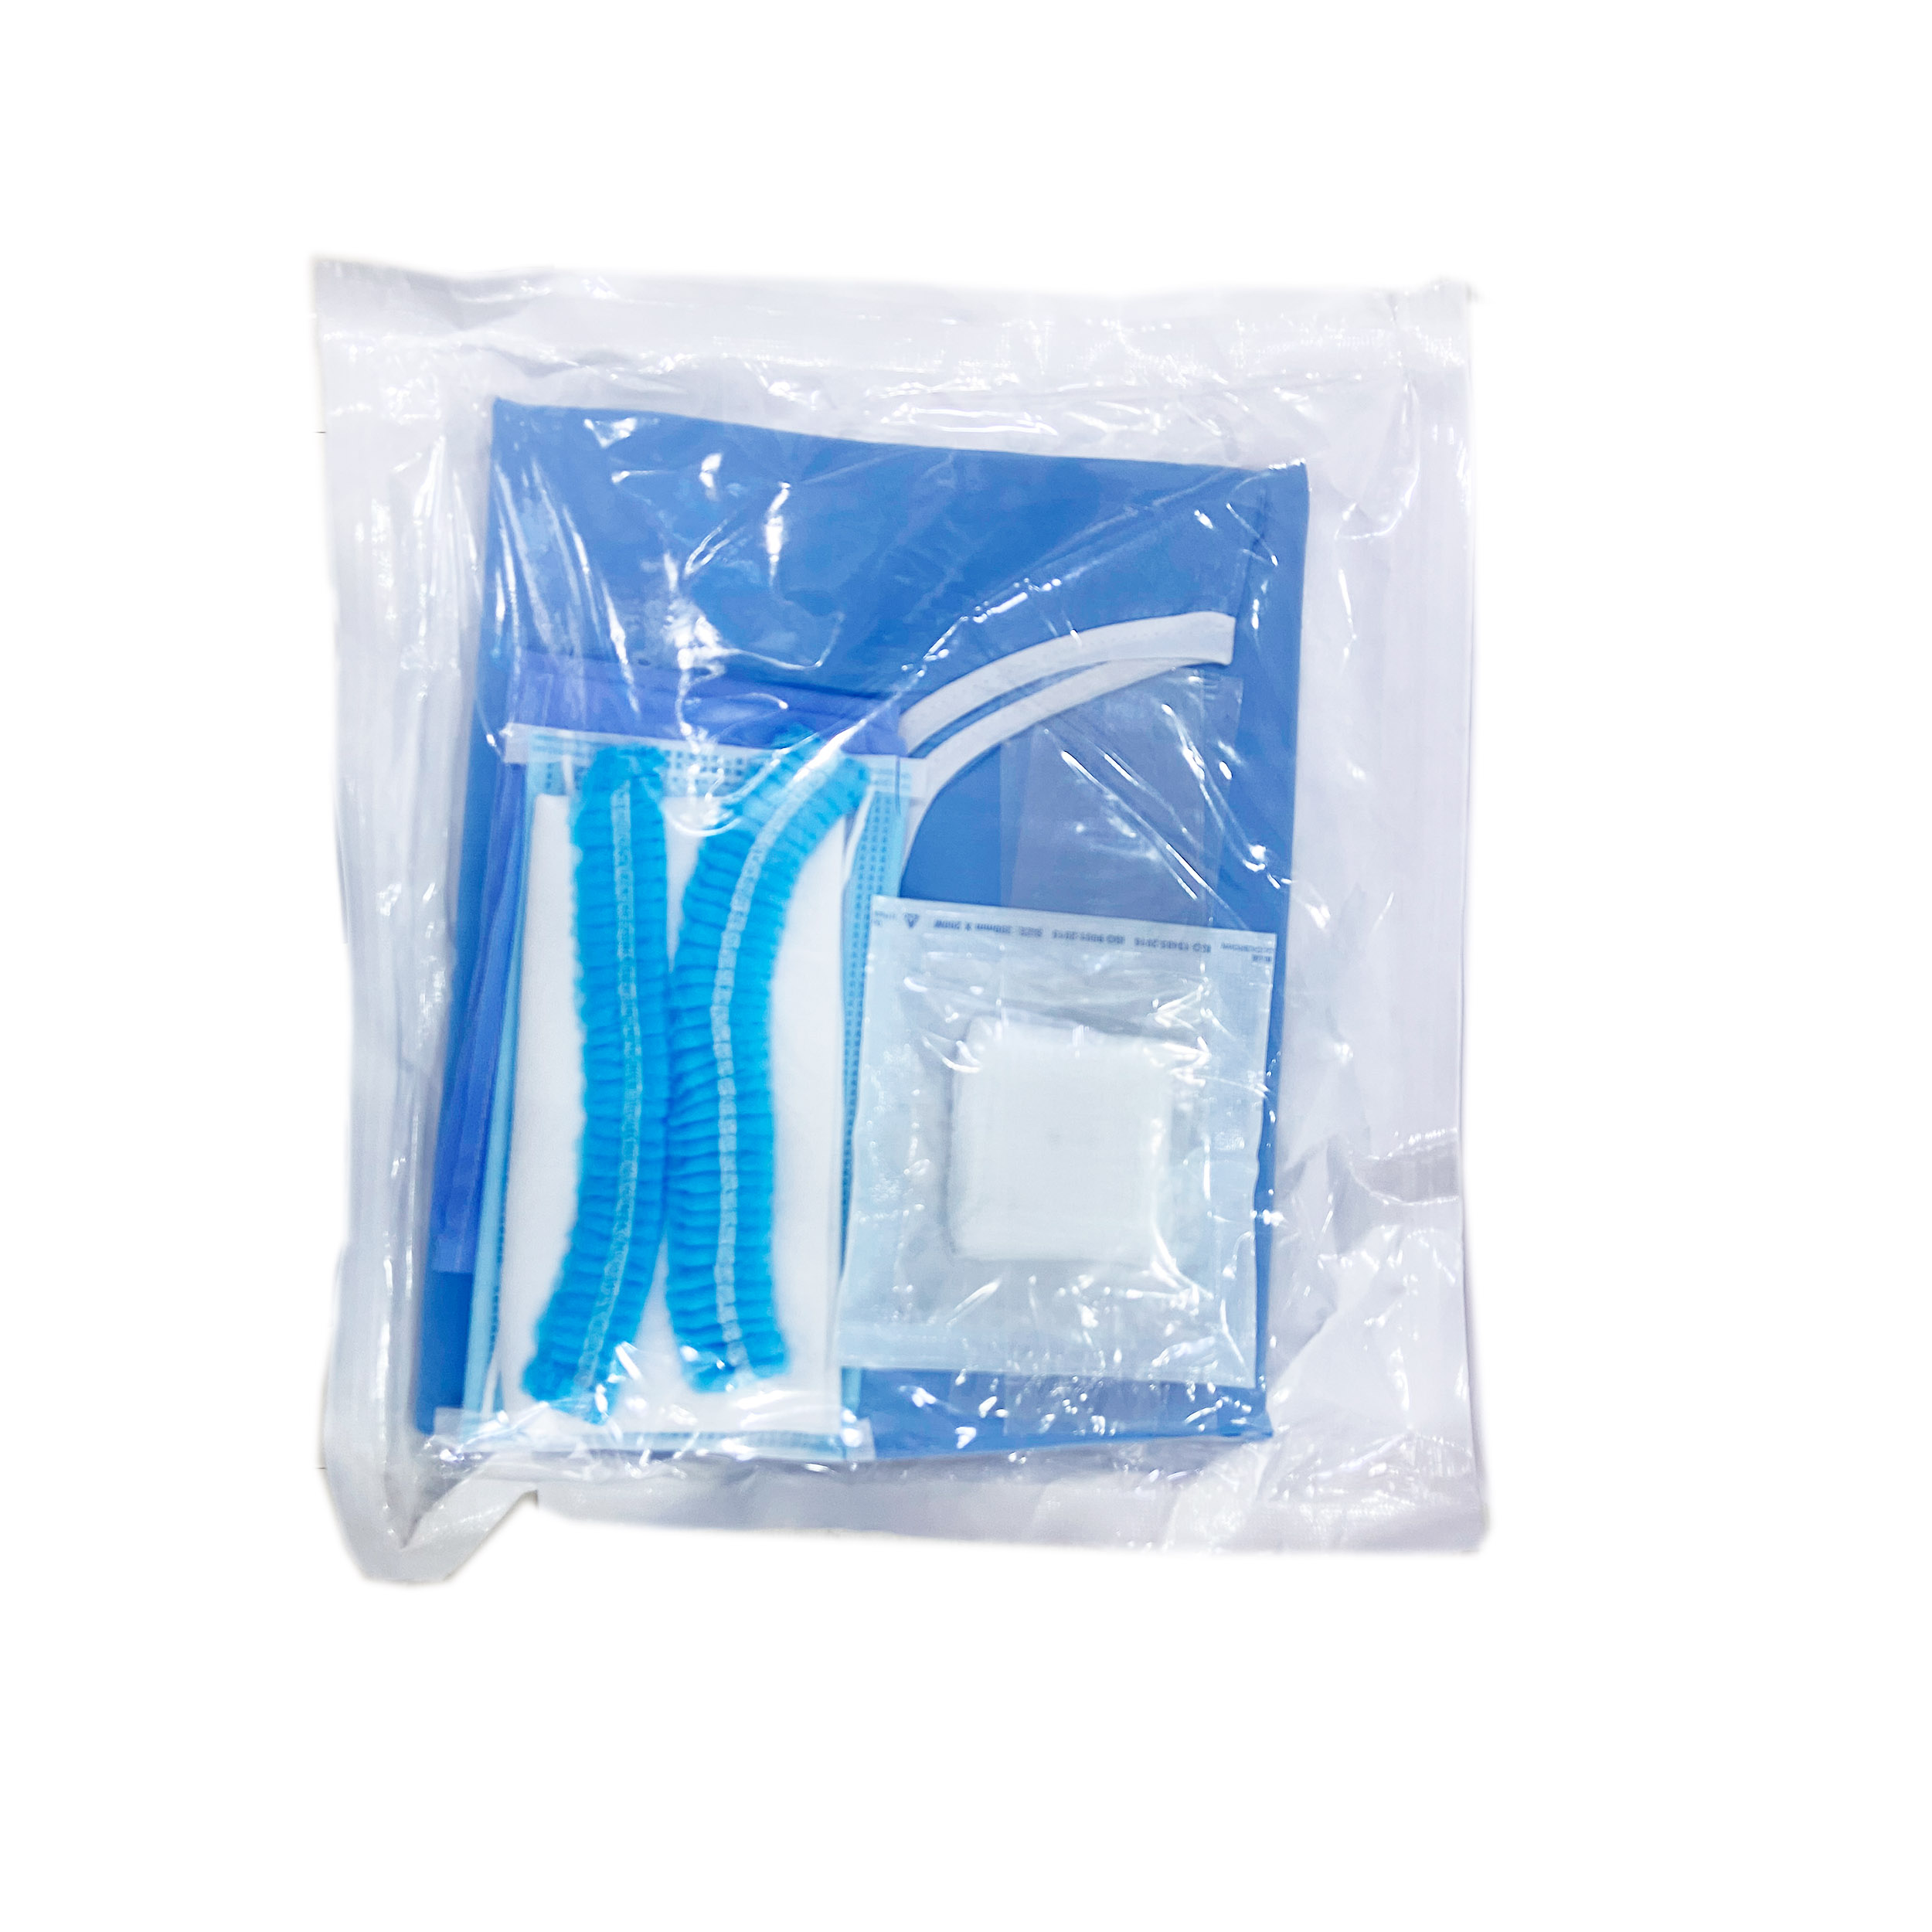 Dental Disposable Surgical Implant Kit